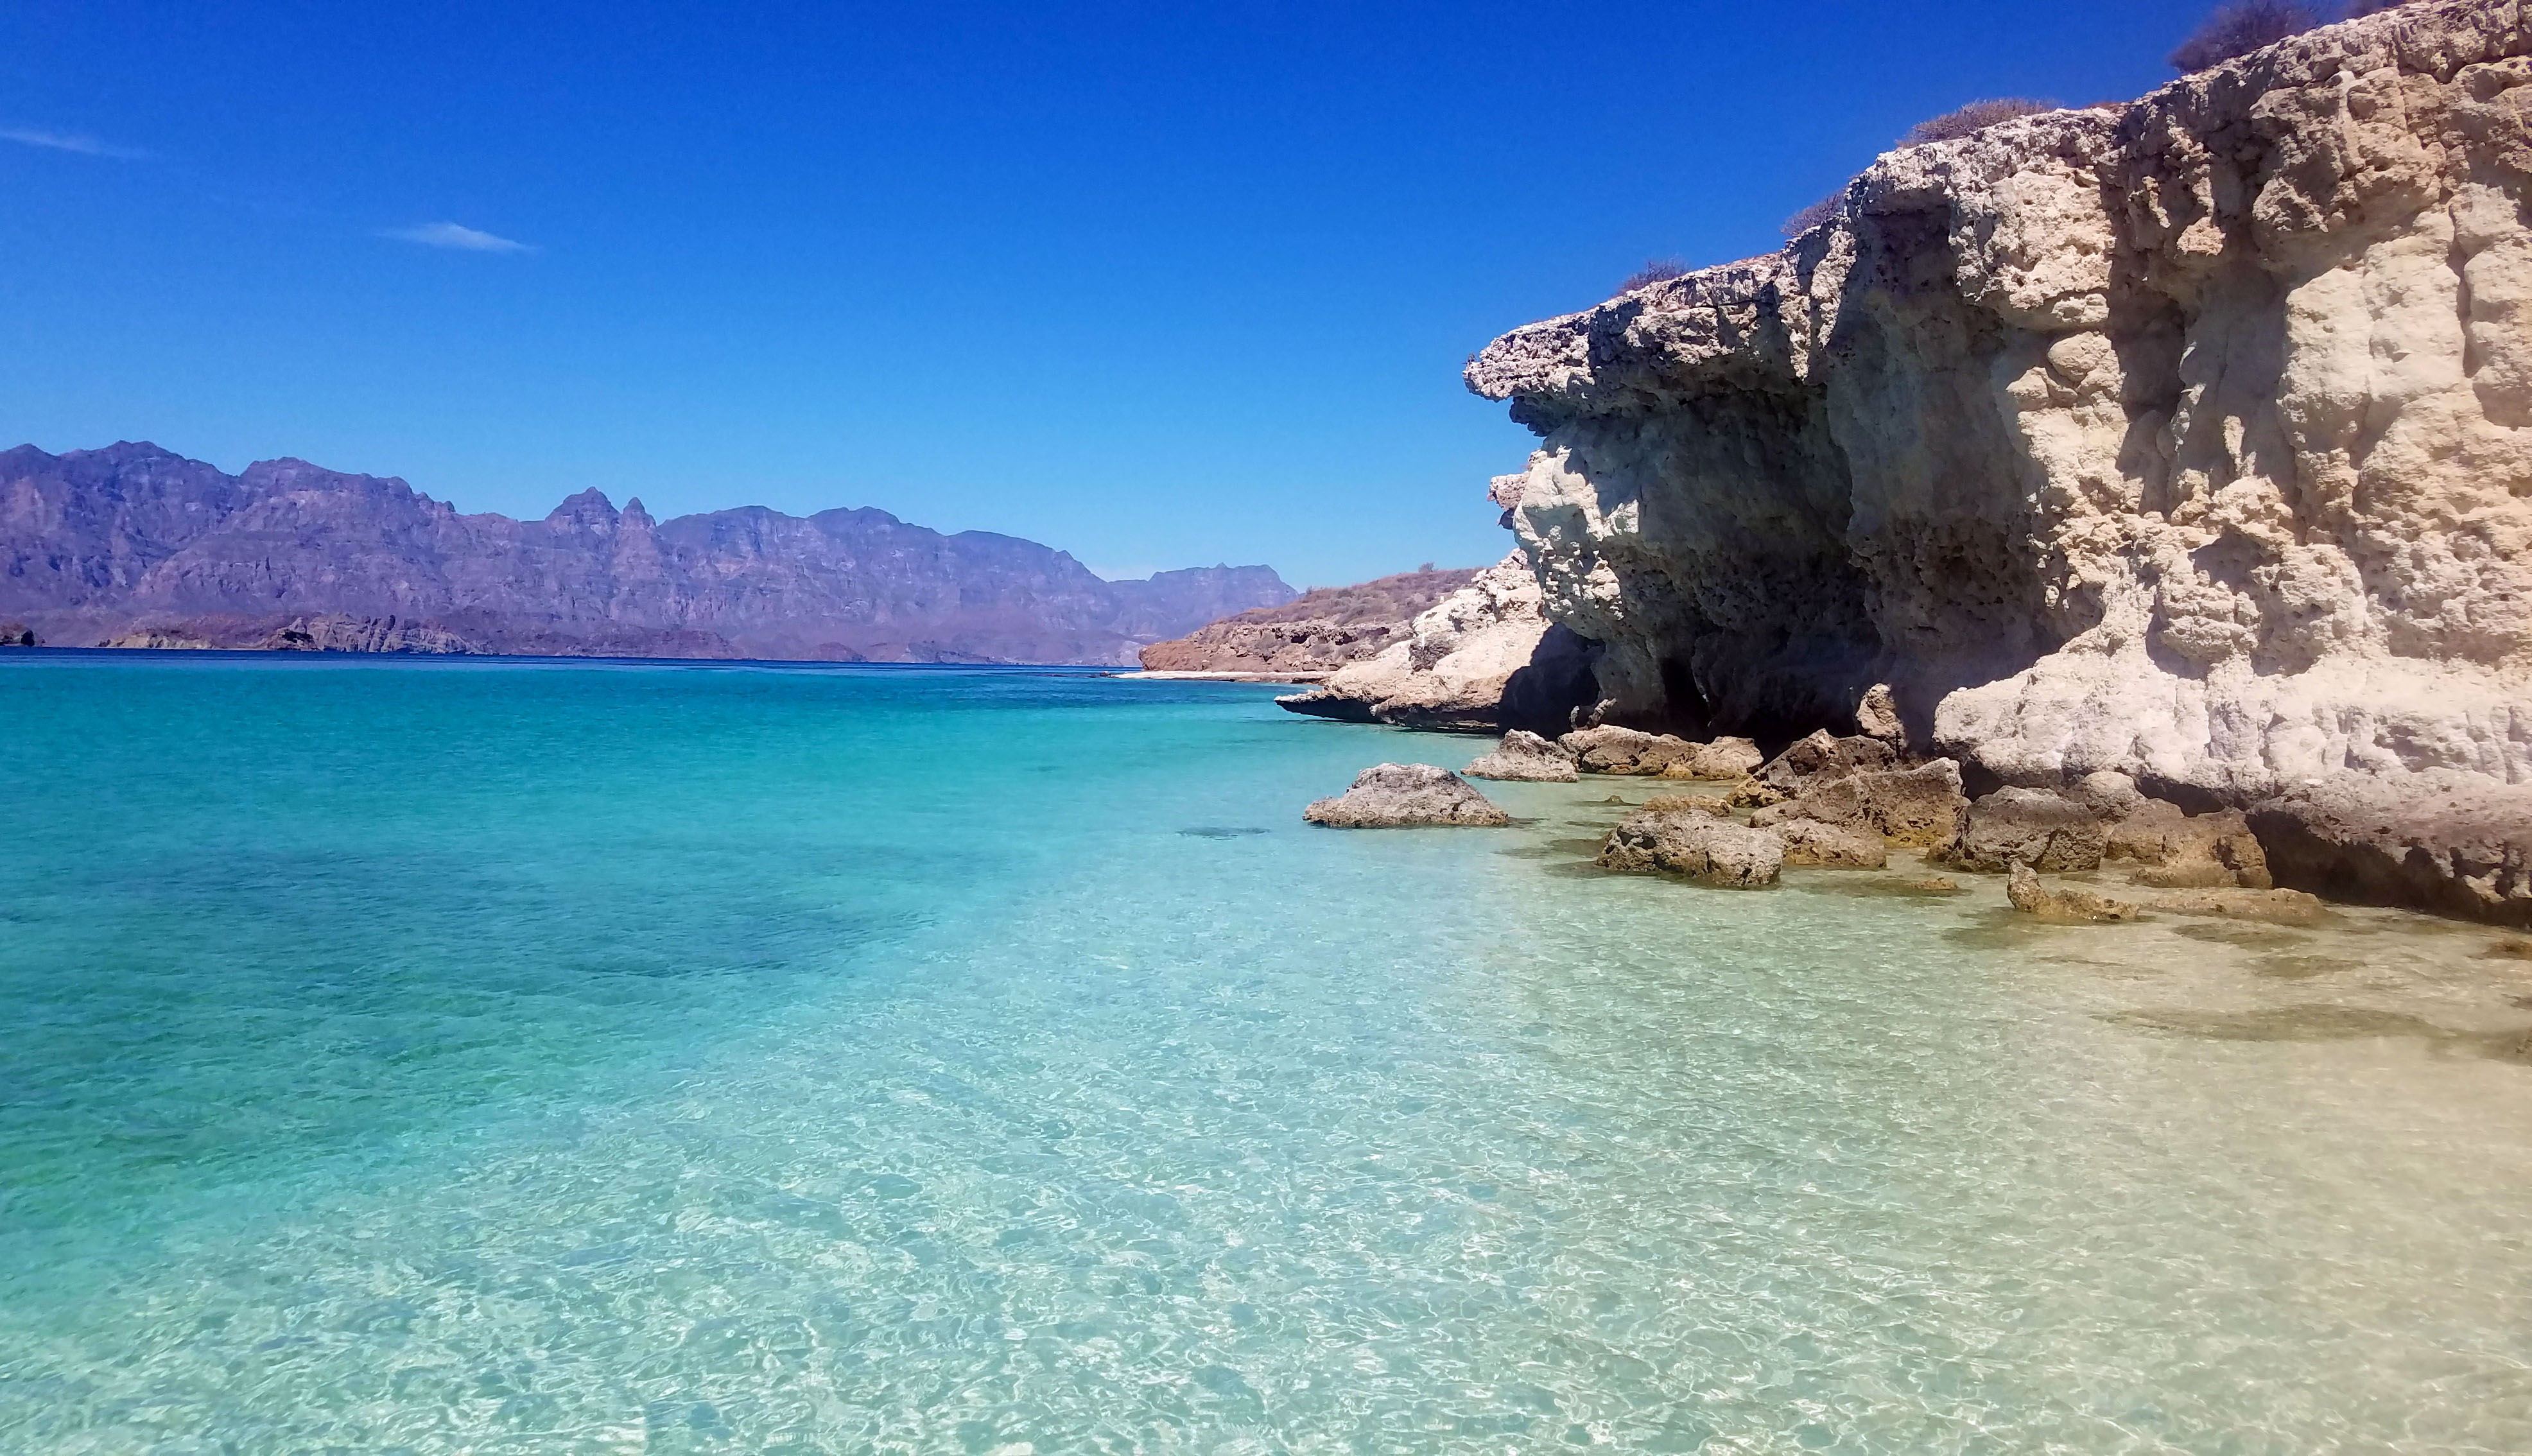 The beautiful clear water around the Islands of Loreto